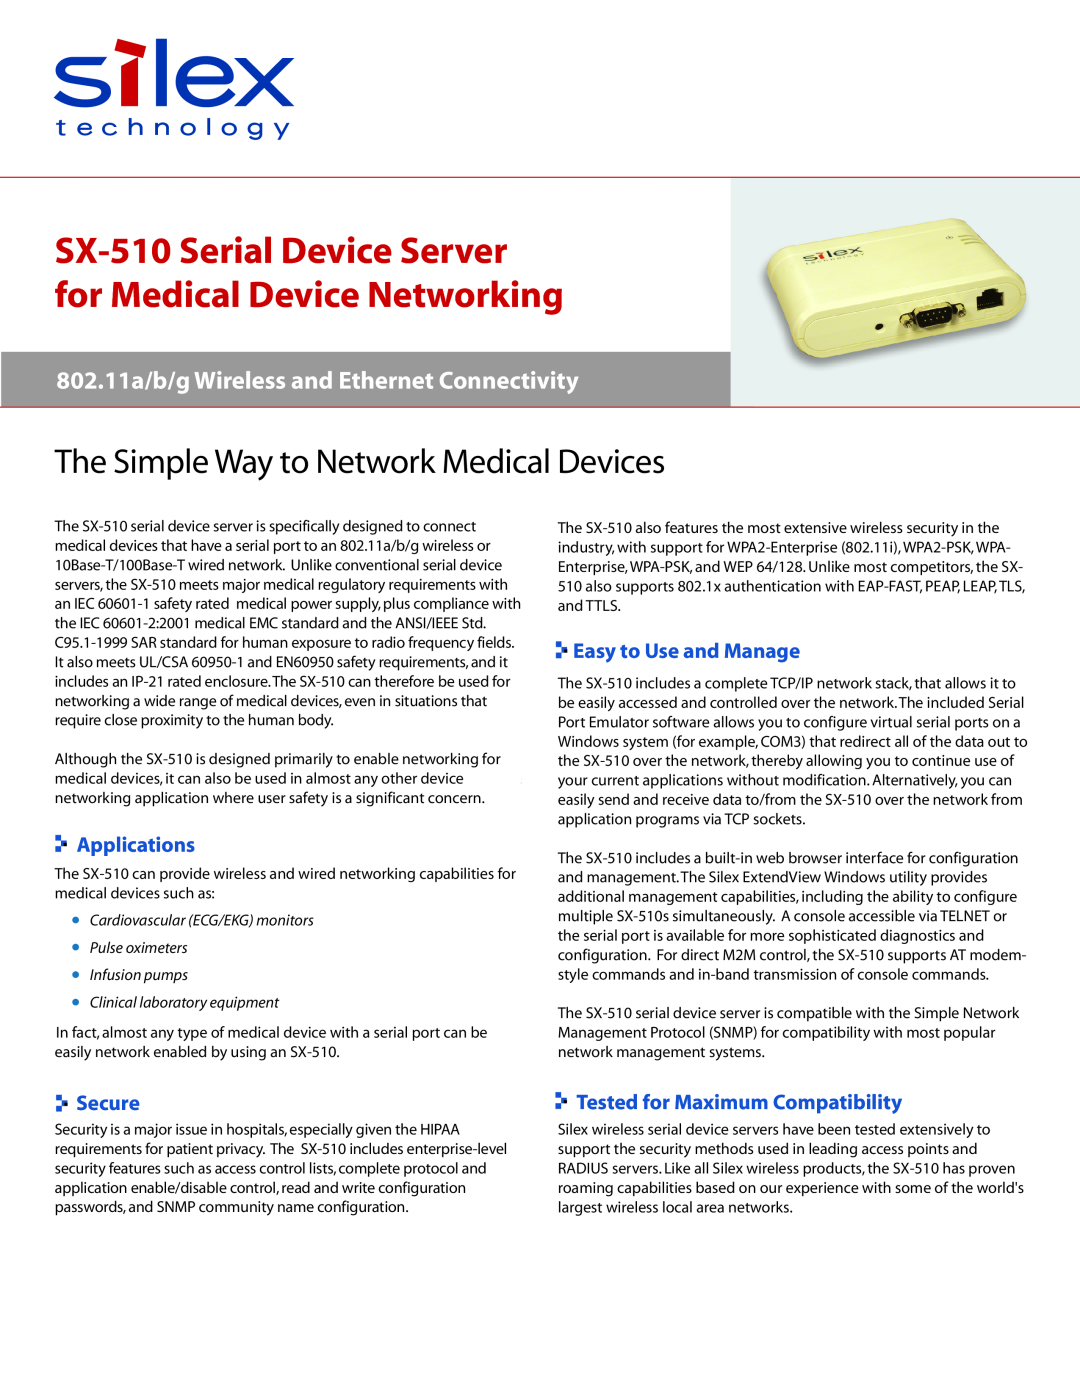 Silex technology manual SX-510 Serial Device Server for Medical Device Networking, Easy to Use and Manage, Applications 